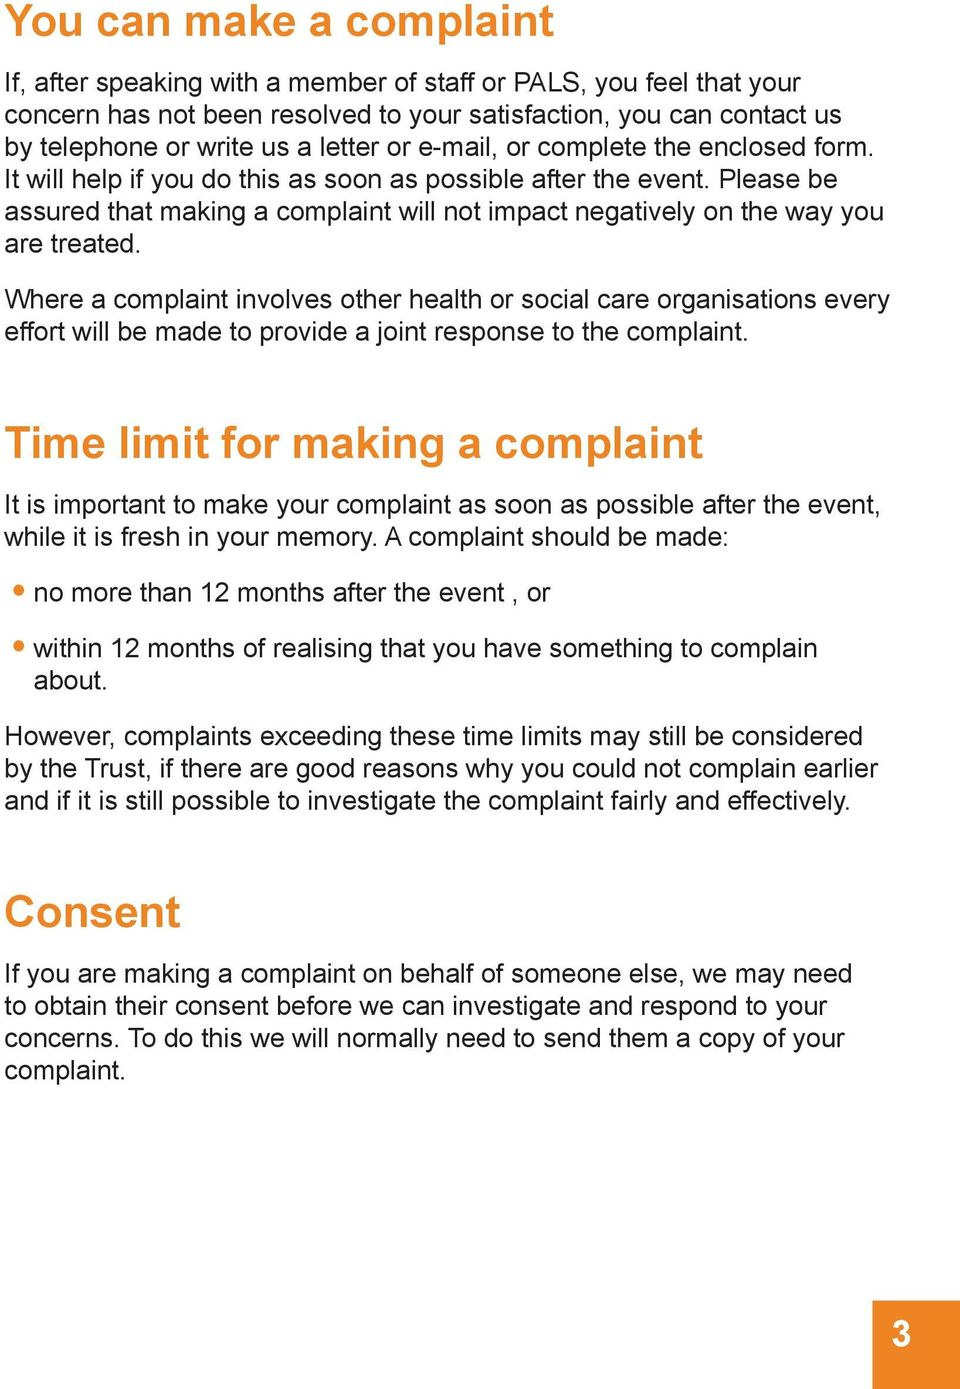 Please be assured that making a complaint will not impact negatively on the way you are treated.